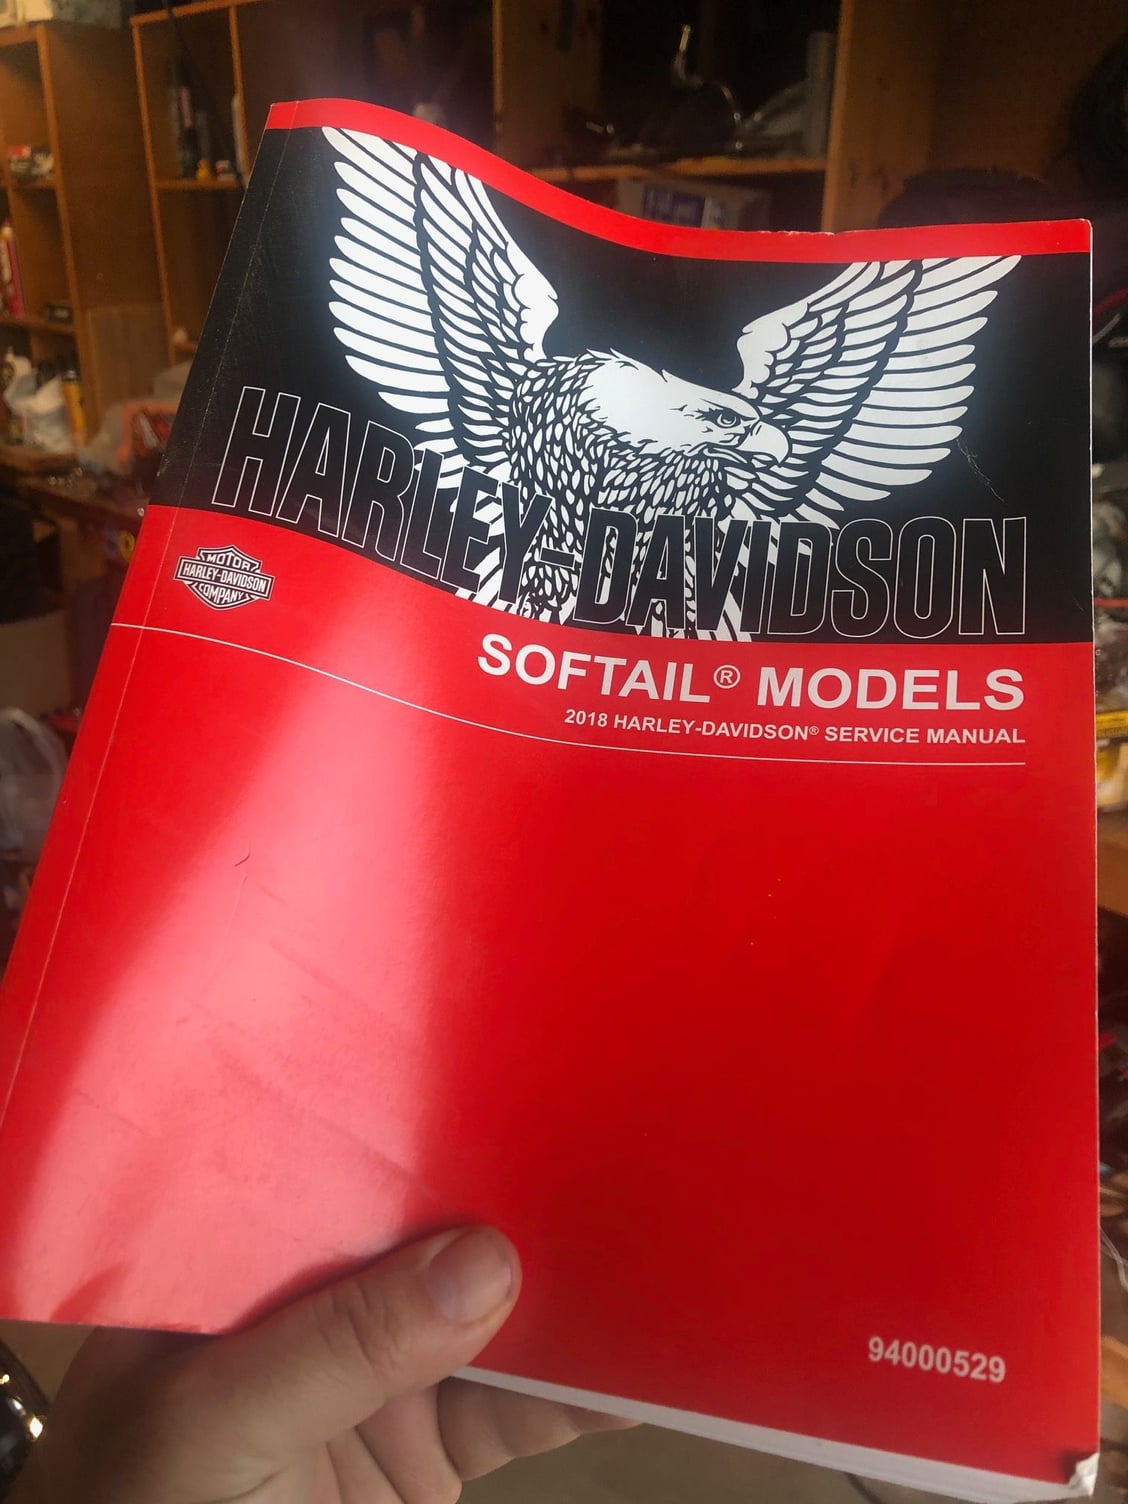 Factory service manual for 2018 Softails - Harley Davidson Forums